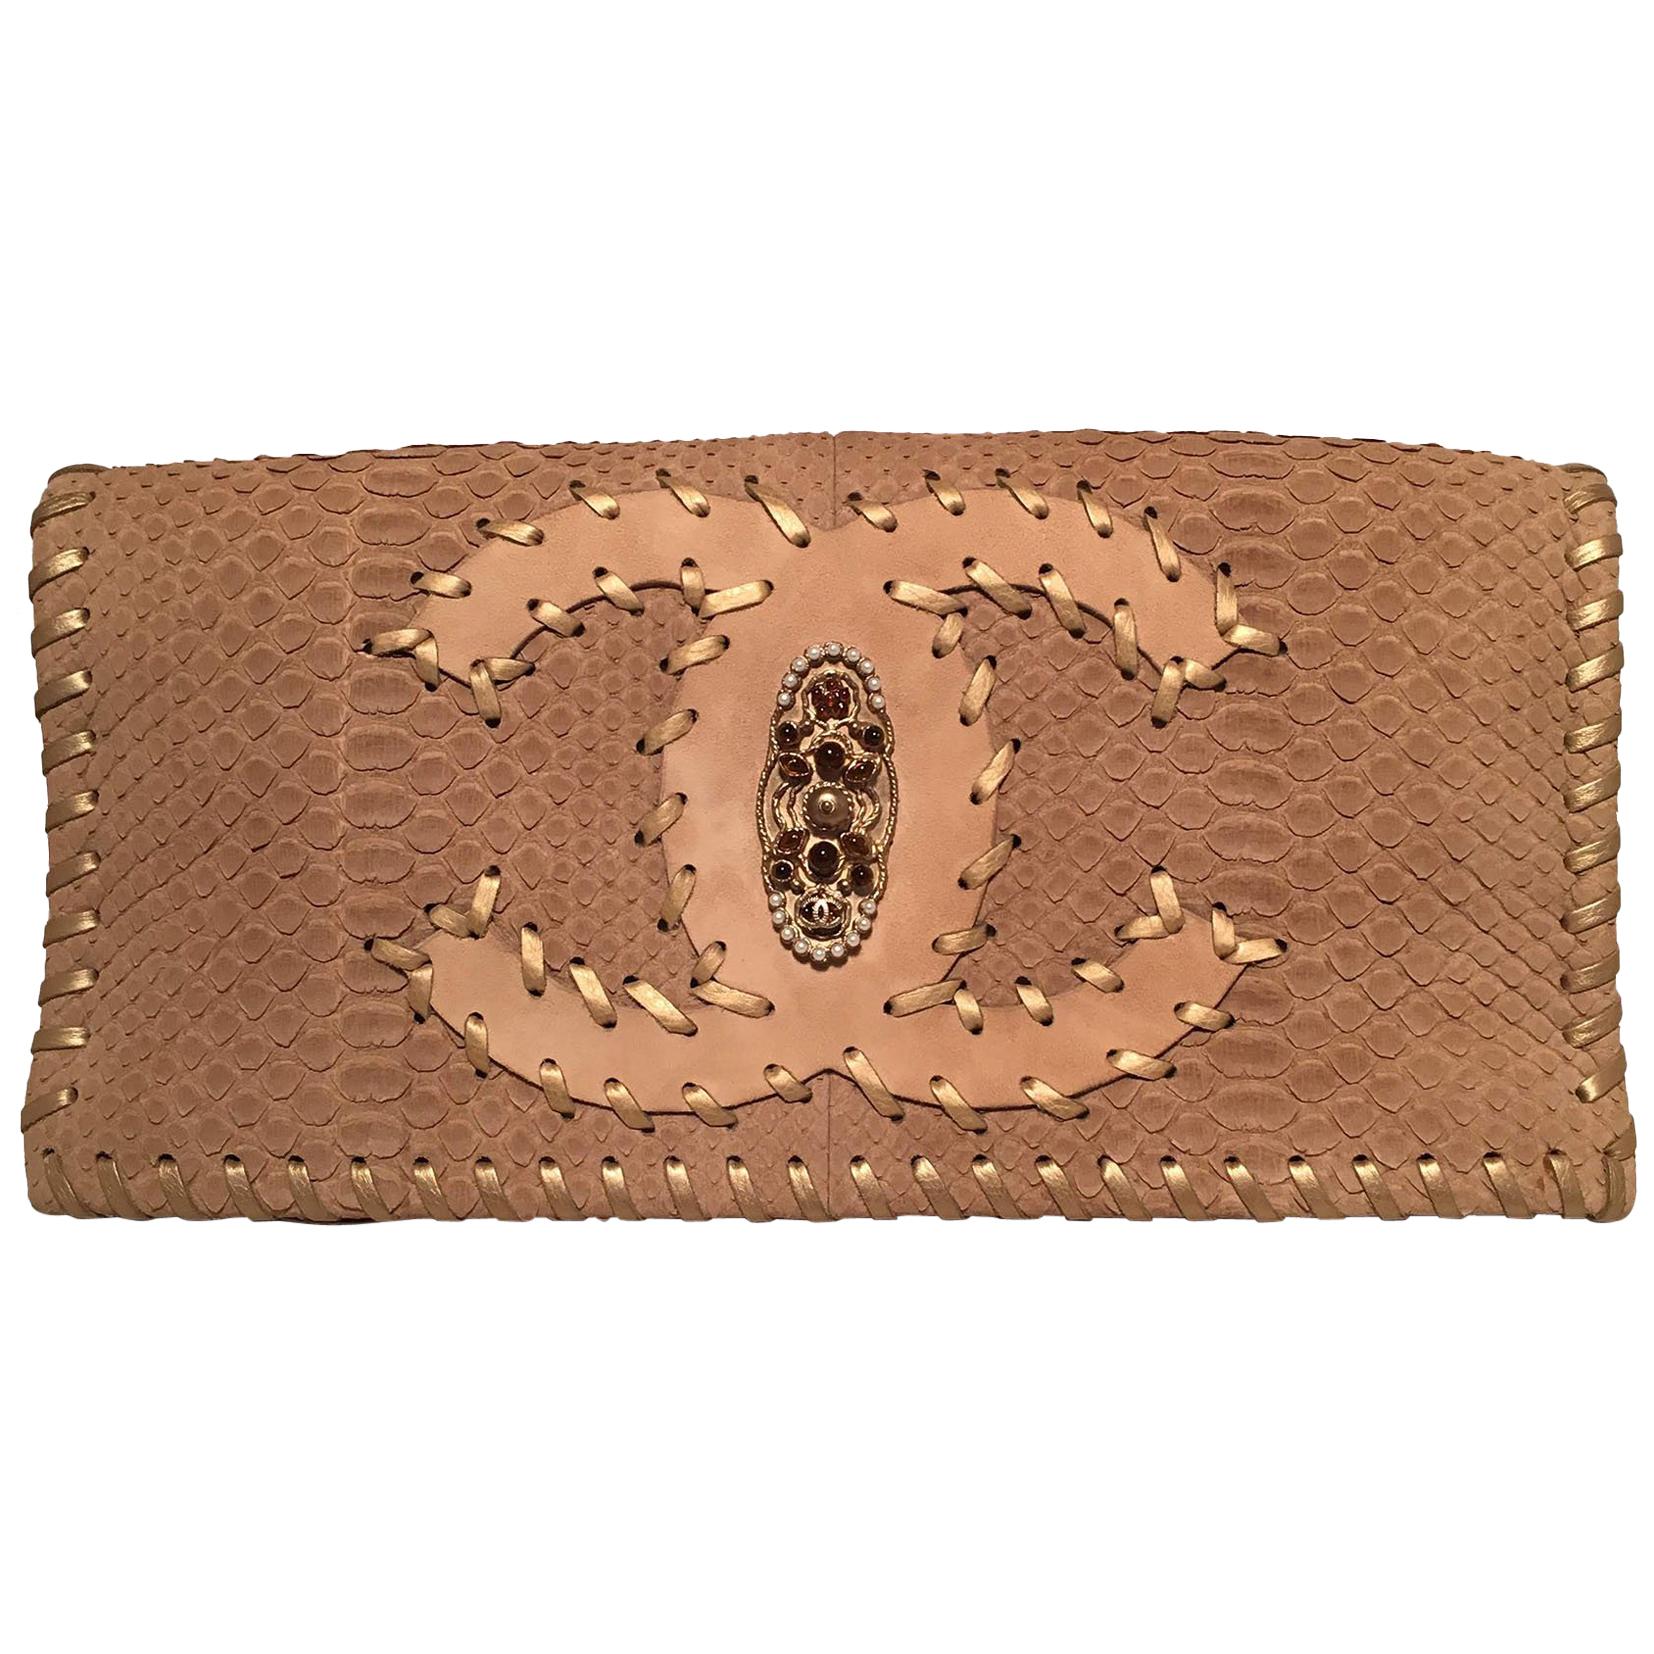 Chanel Tan Snakeskin Leather Patch Gold Stitched Jeweled CC Fold Over Clutch